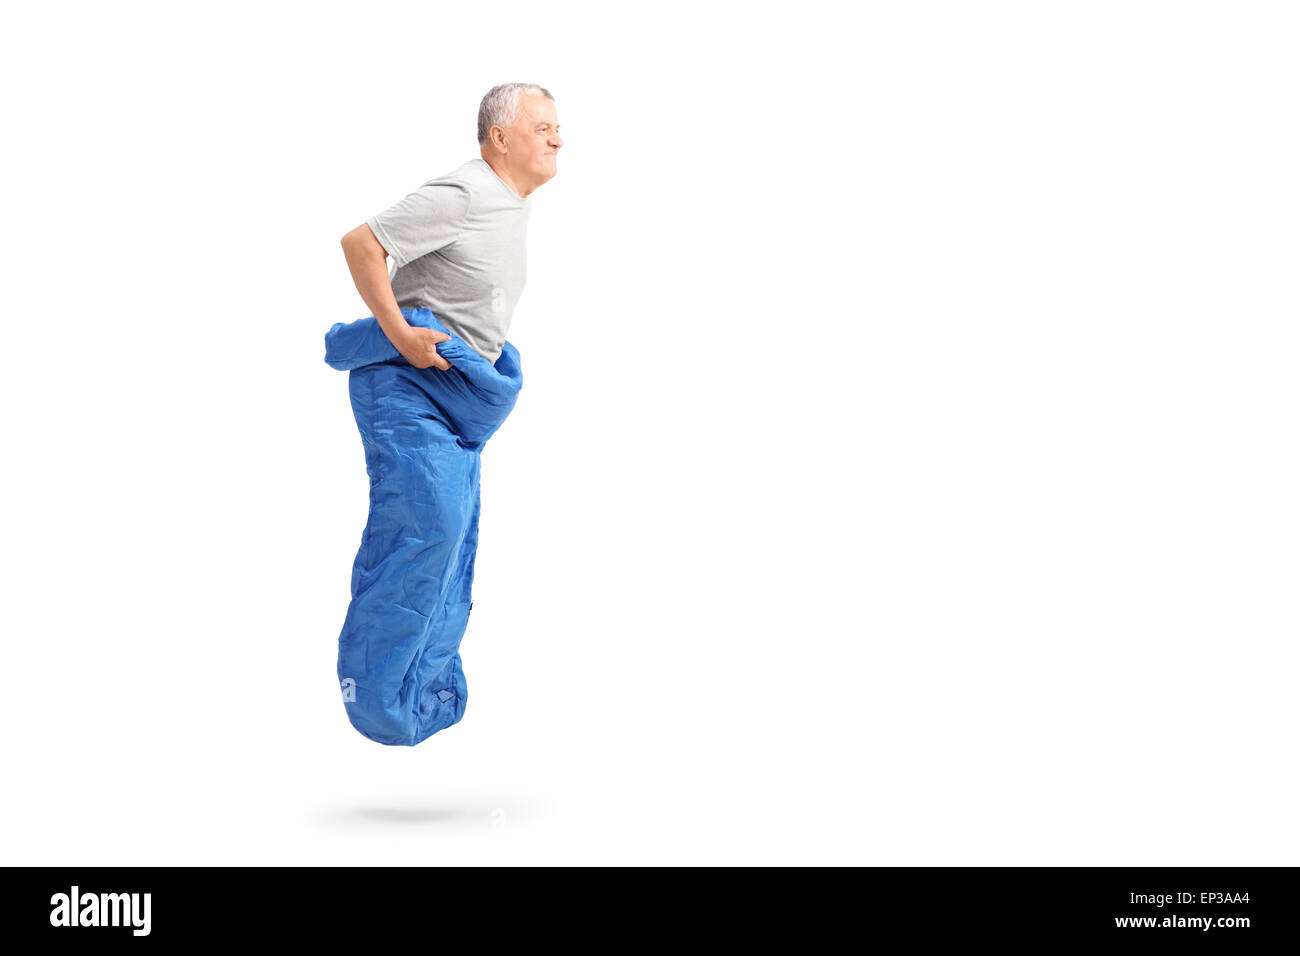 Senior man jumping in a blue sack and smiling isolated on white background Stock Photo